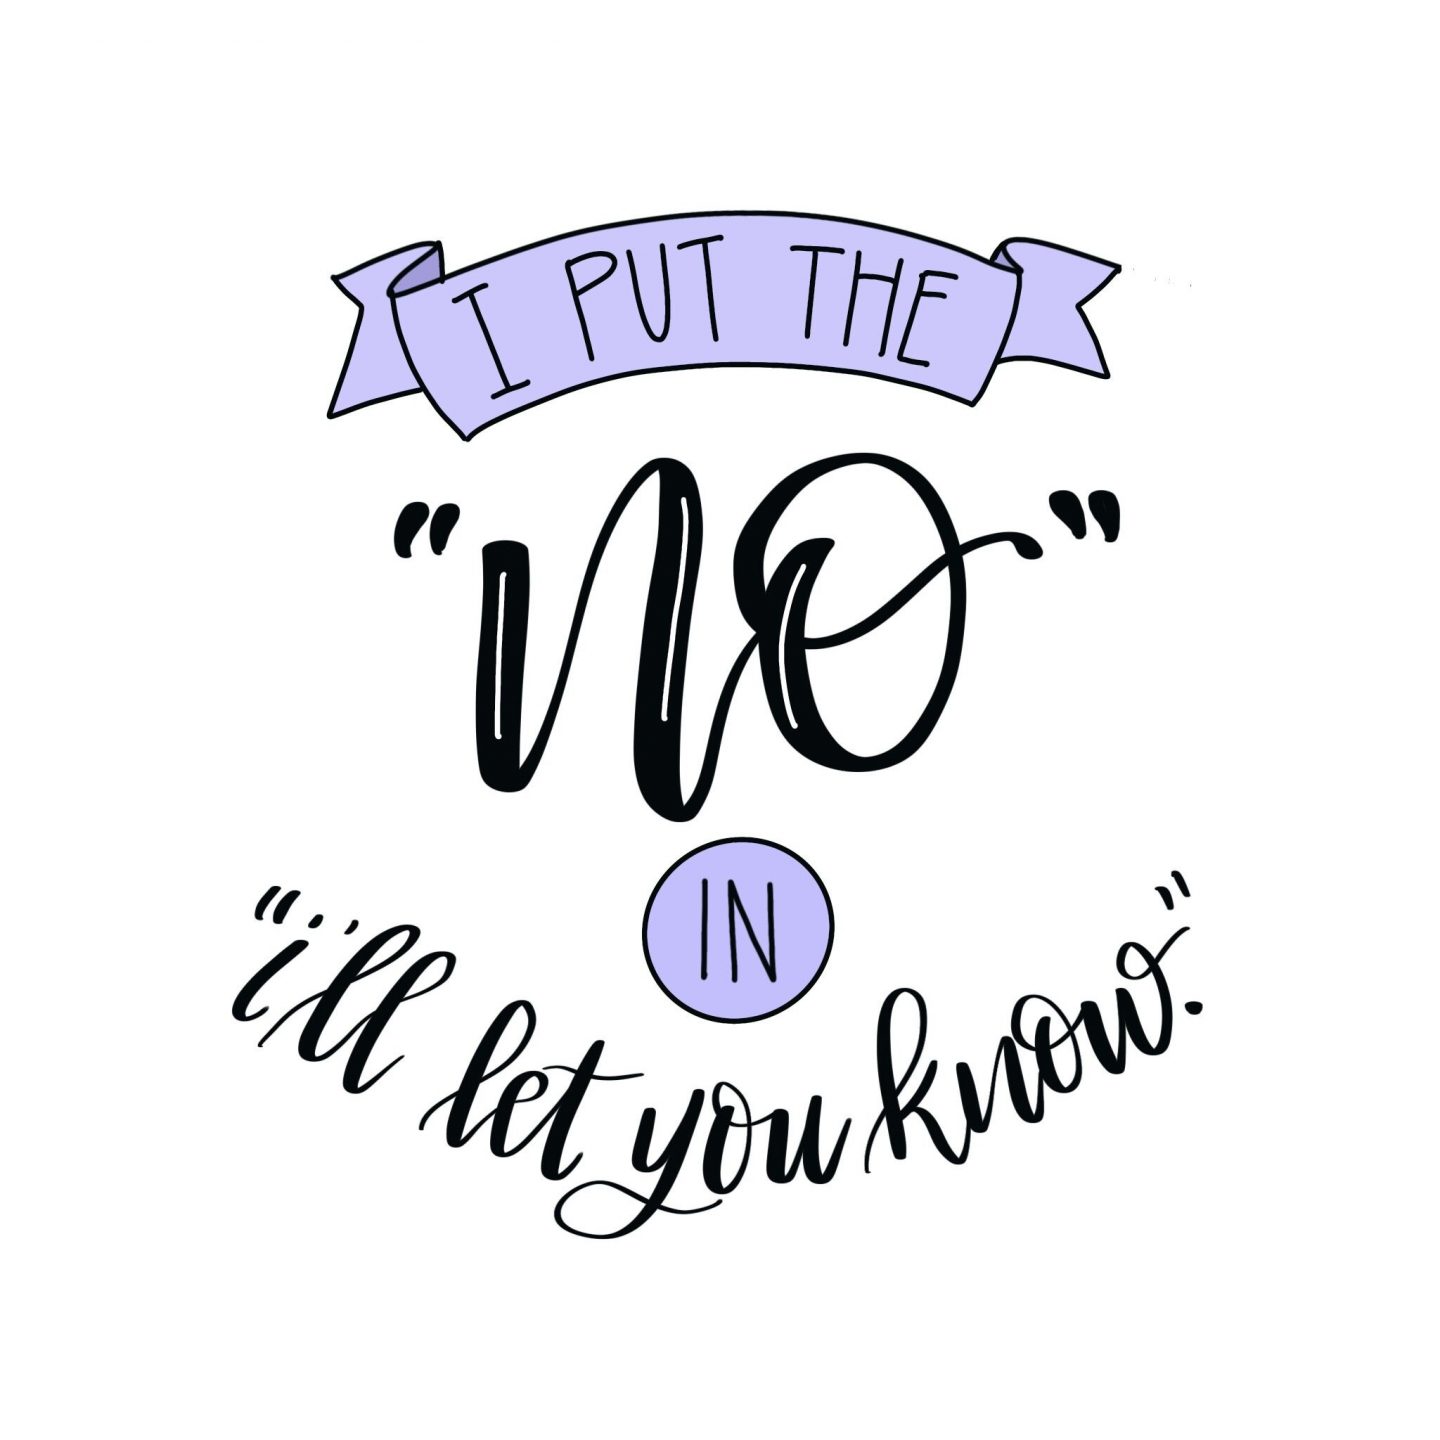 Humorous and whimsical quote with handlettering by Amy Latta. #handlettering #funnyquote #momhumor #amylatta